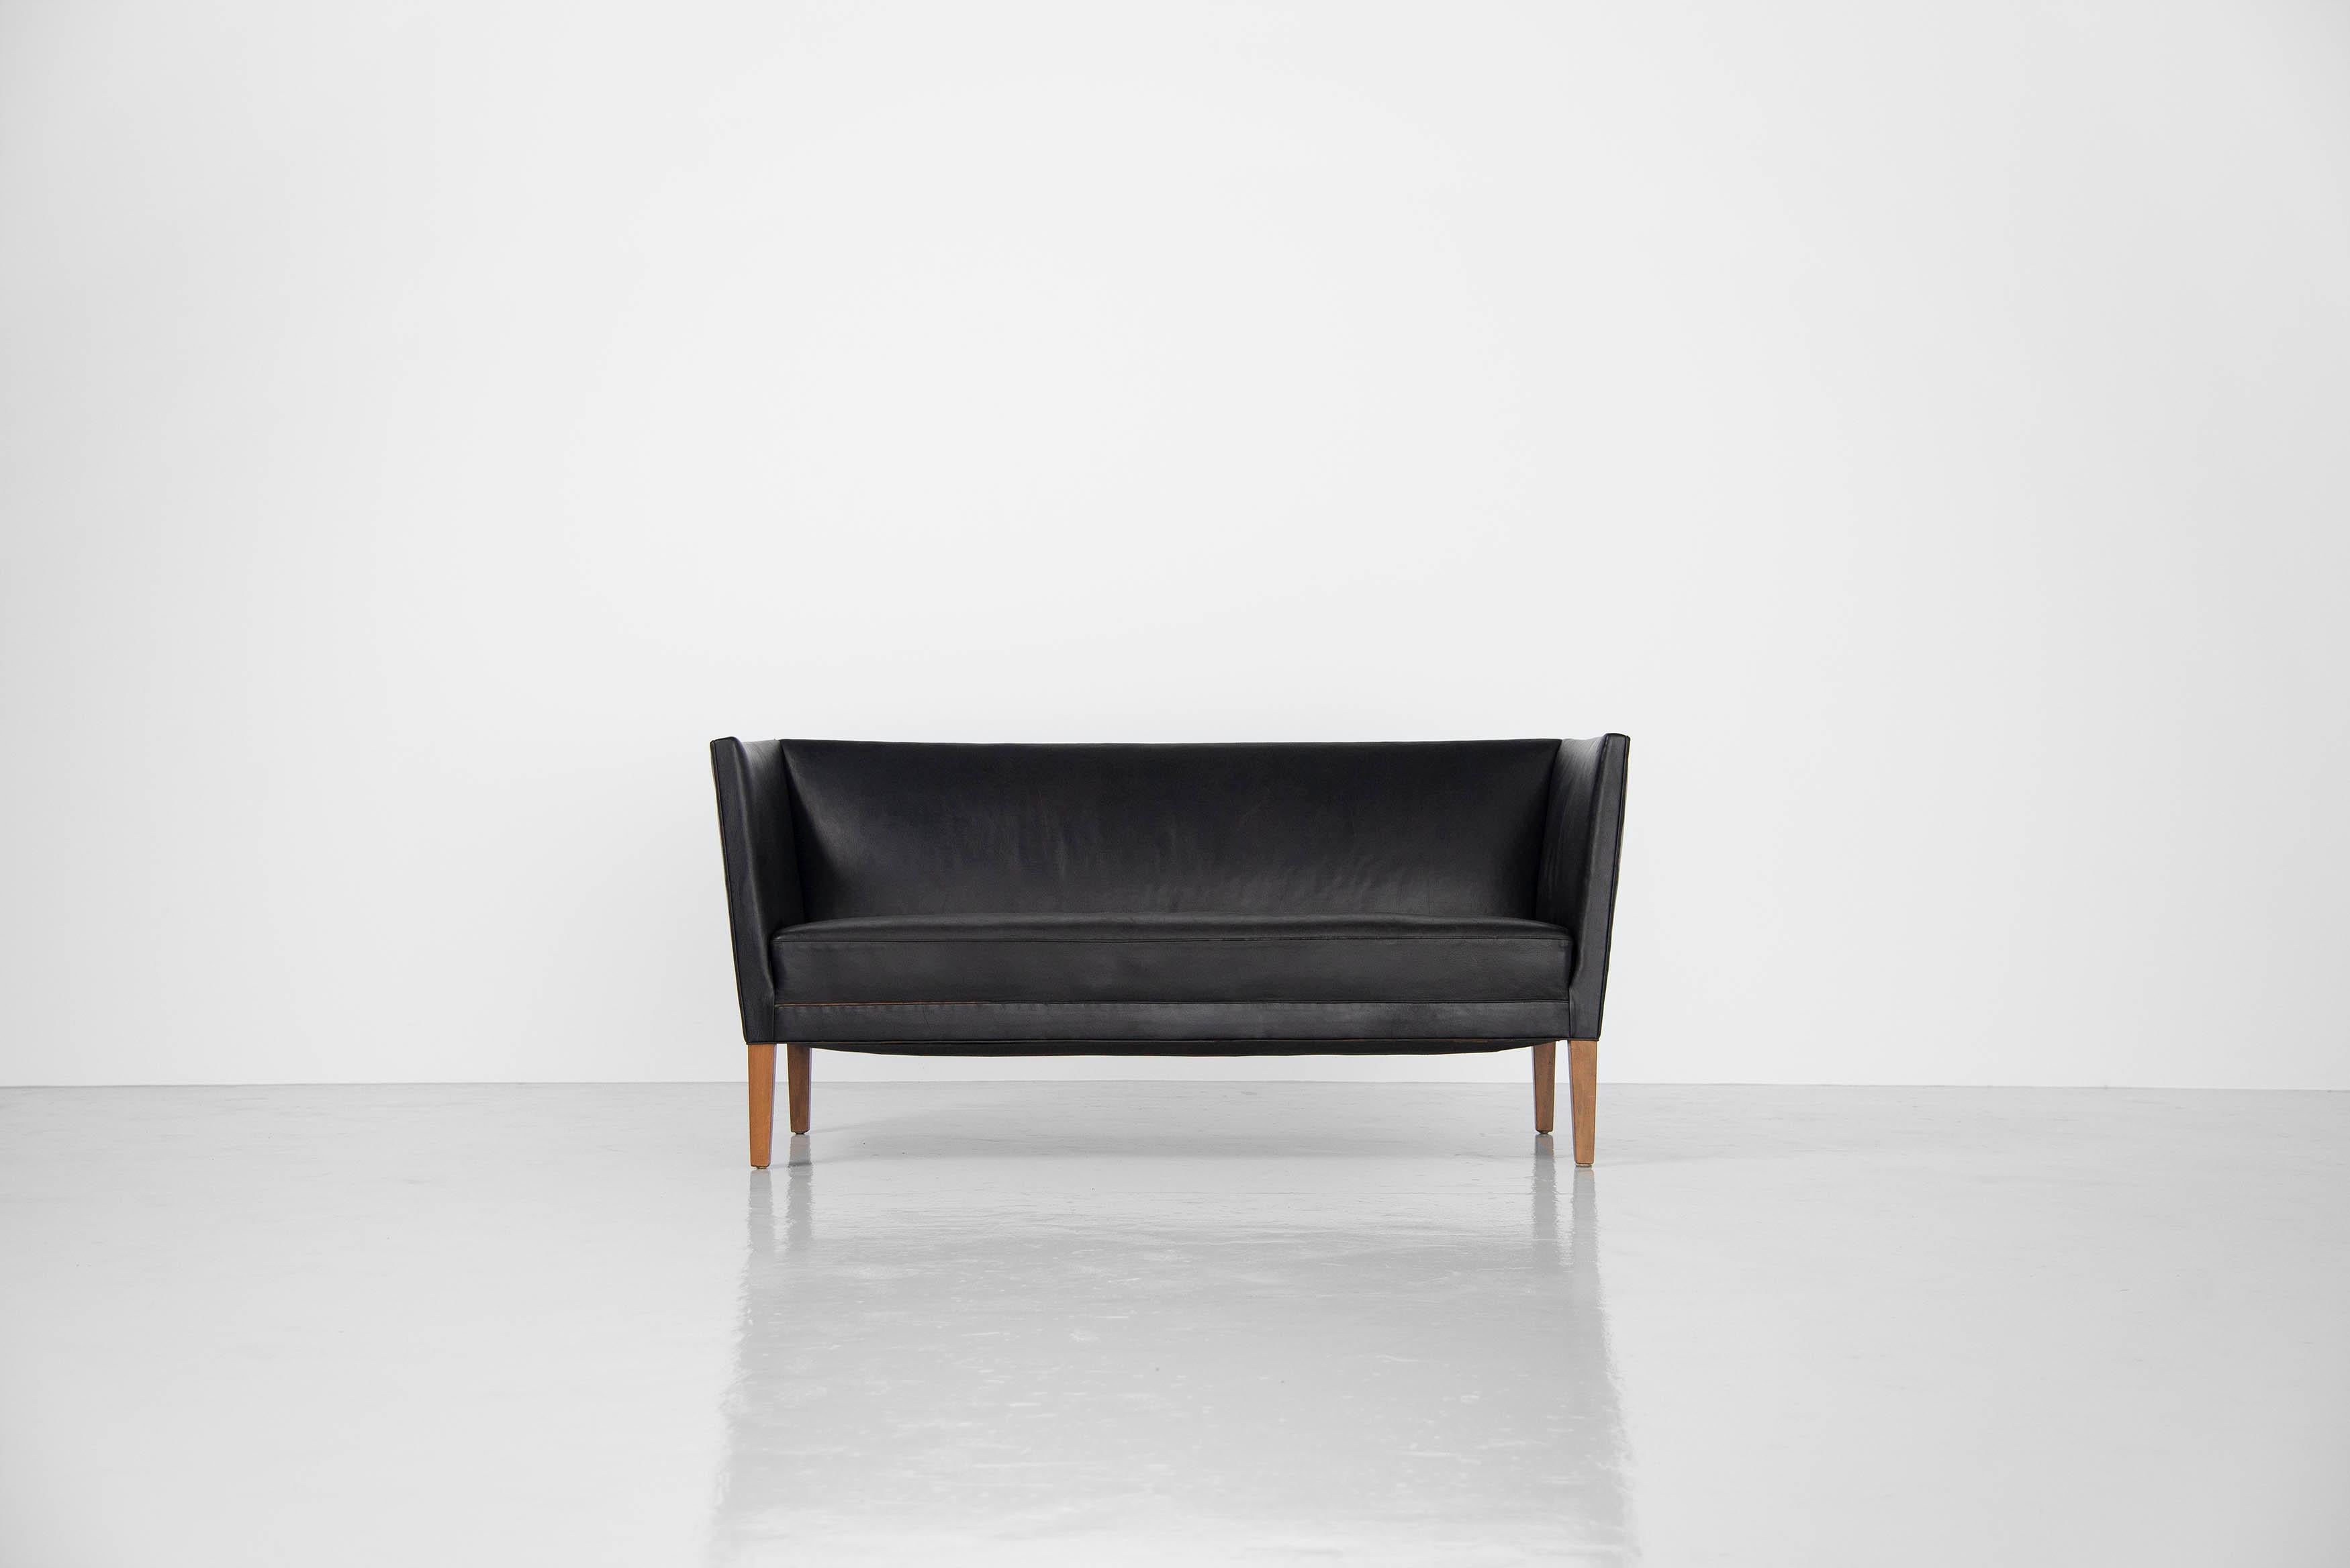 Beautiful small Danish sofa or love seat, model JH180 designed by Grete Jalk and manufactured by Johannes Hansen, Denmark 1955. This beautiful shaped sofa has very nice and subtle lines, it doesnt look very special but it surely is. This sofa is